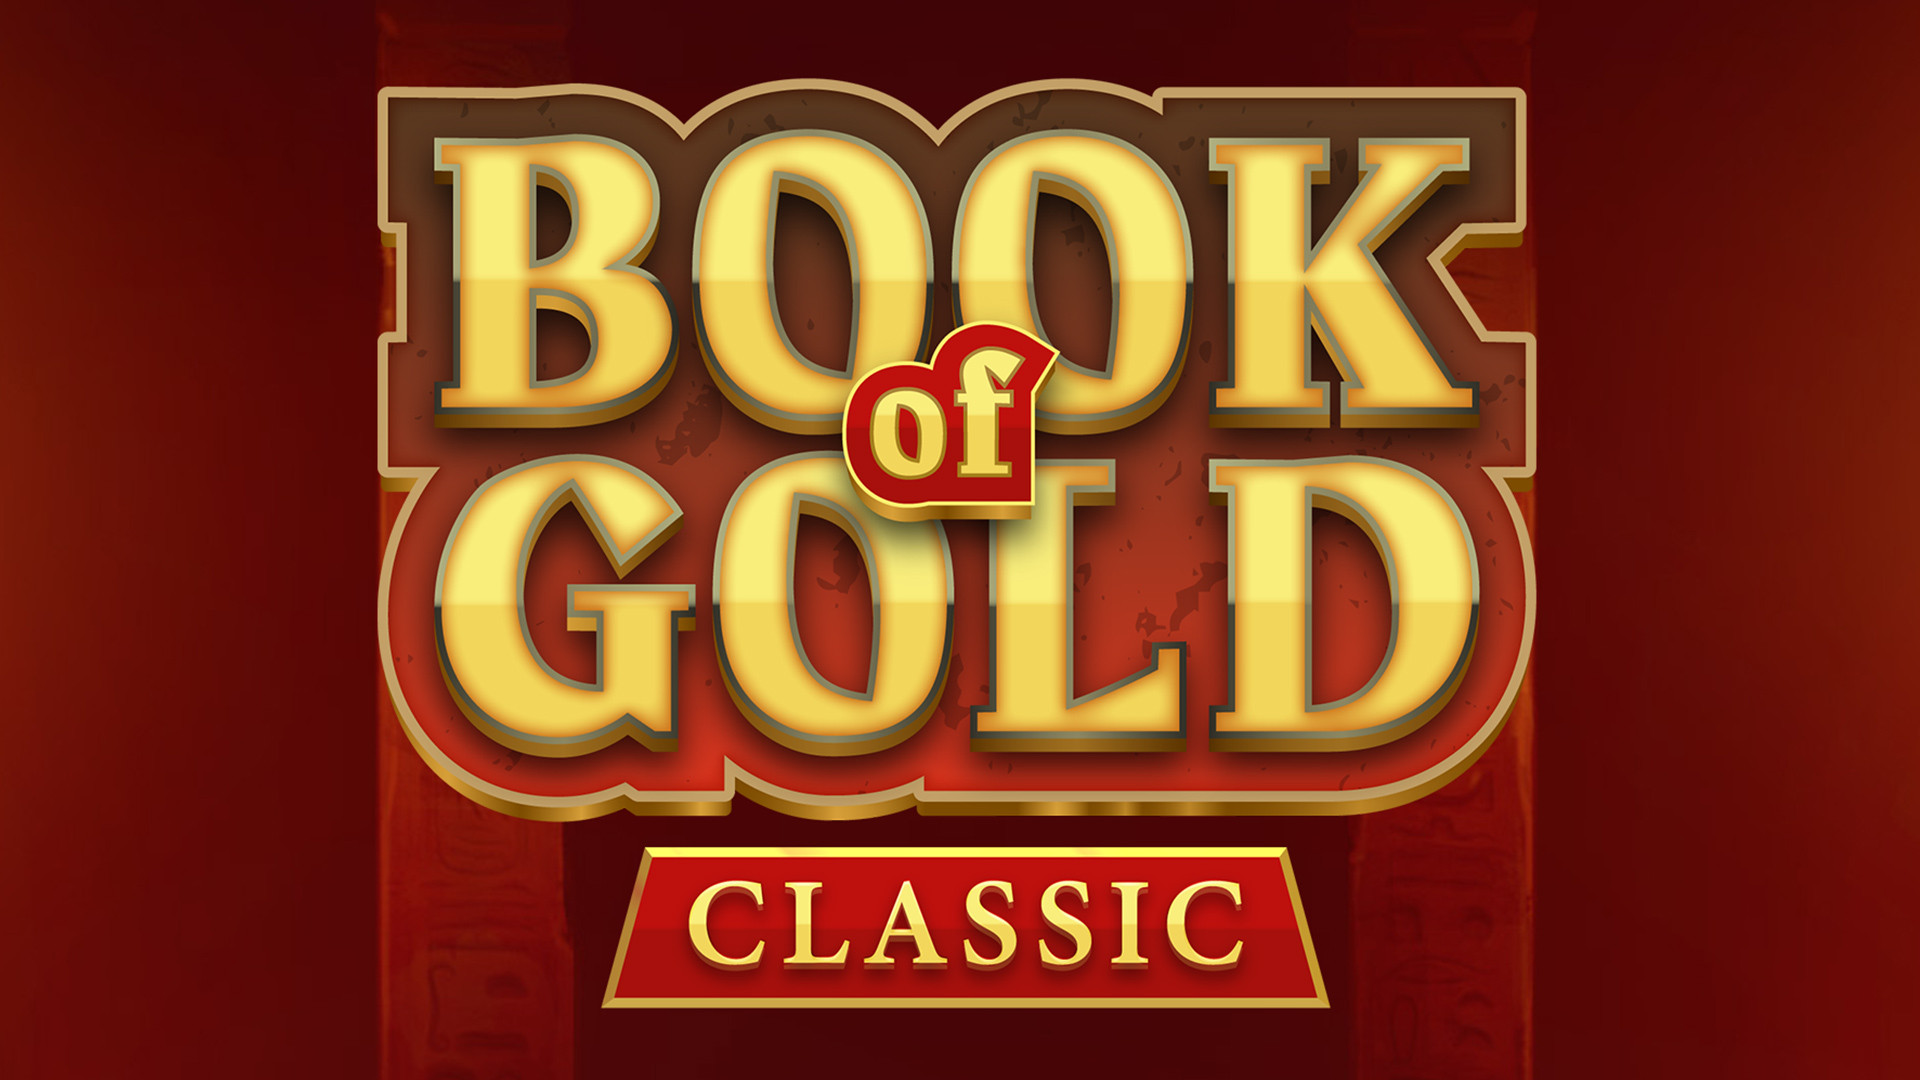 Book of Gold: Classic